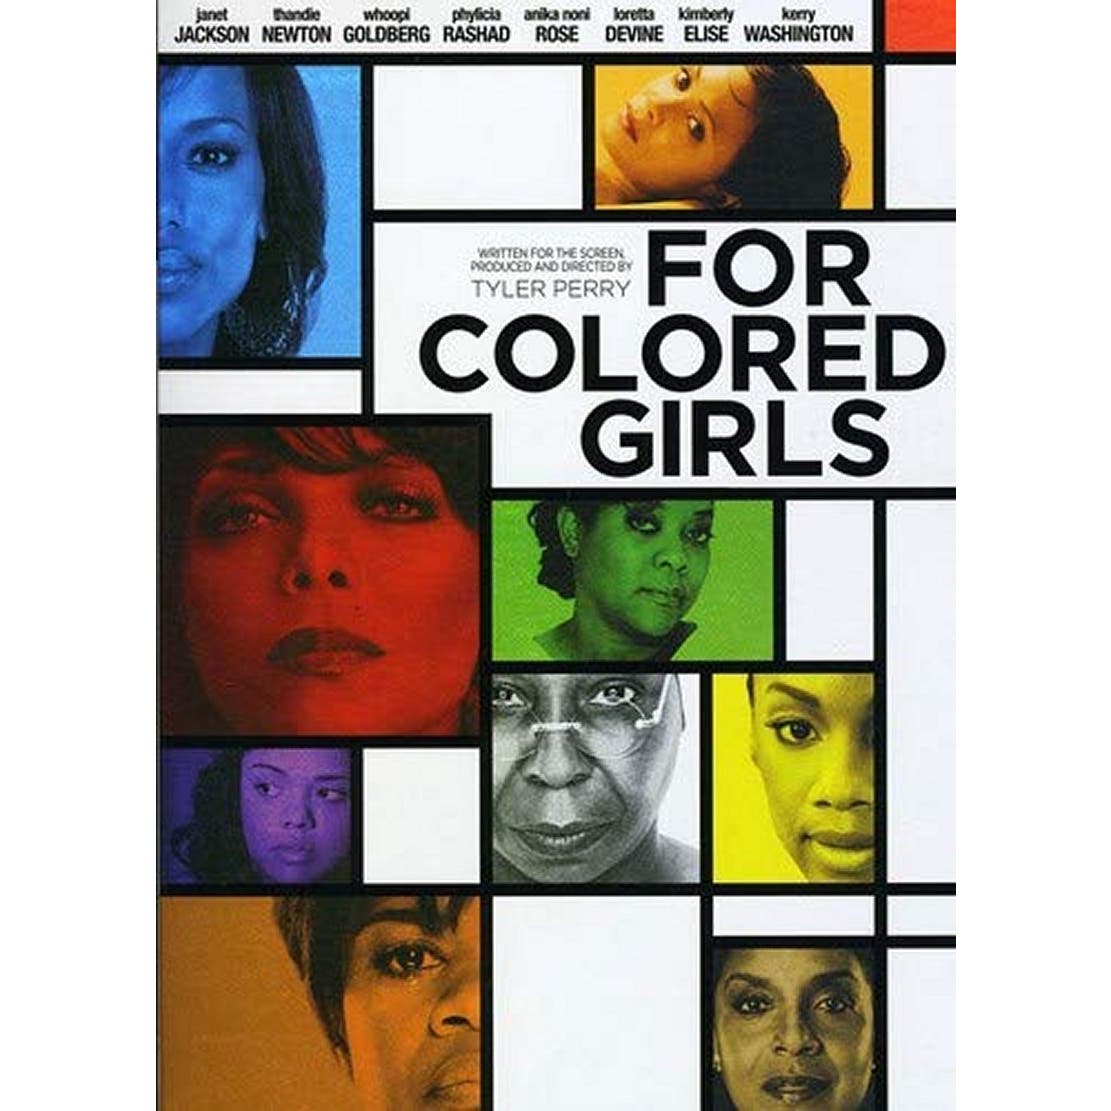 Tyler Perry's FOR COLORED GIRLS (DVD 2011) Whoopi Golberg, Janet Jackson & More